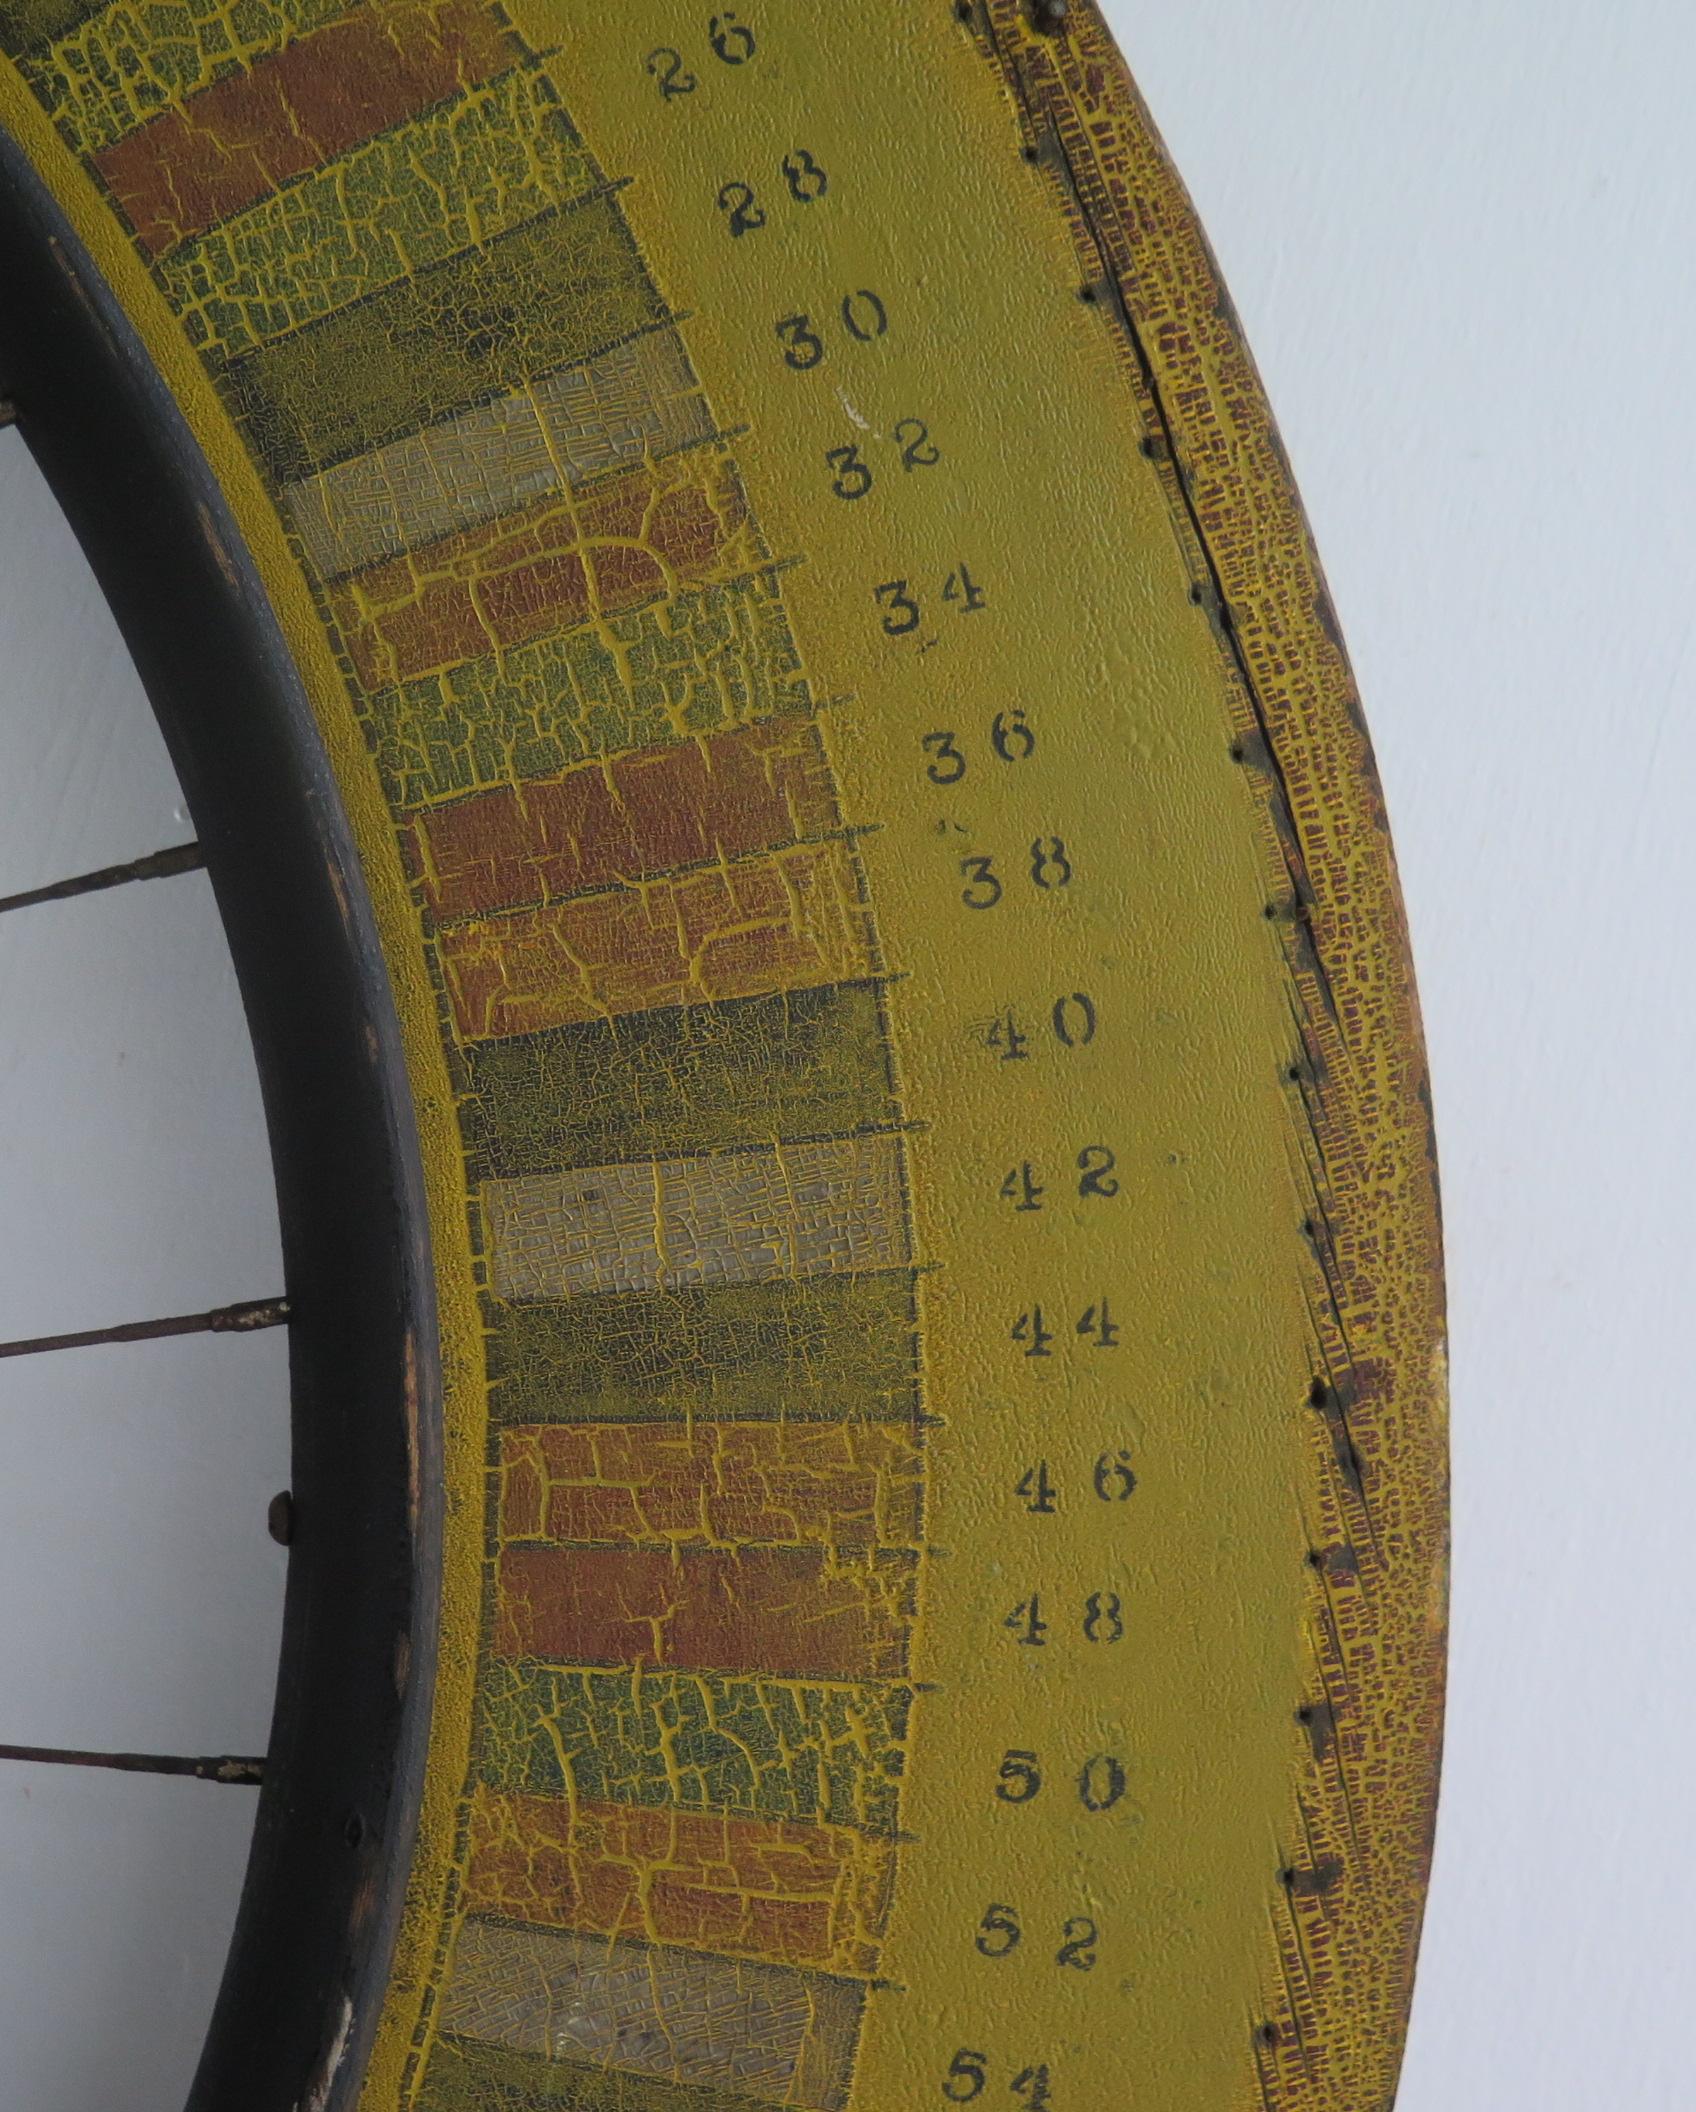 Carnival gaming wheel made from a bicycle wheel joined to a painted wood ring. The wood is painted in bands of softened colors and numbers with an aged cracked surface. The back of the wheel has a circle of nails that would spin and be slowed by a